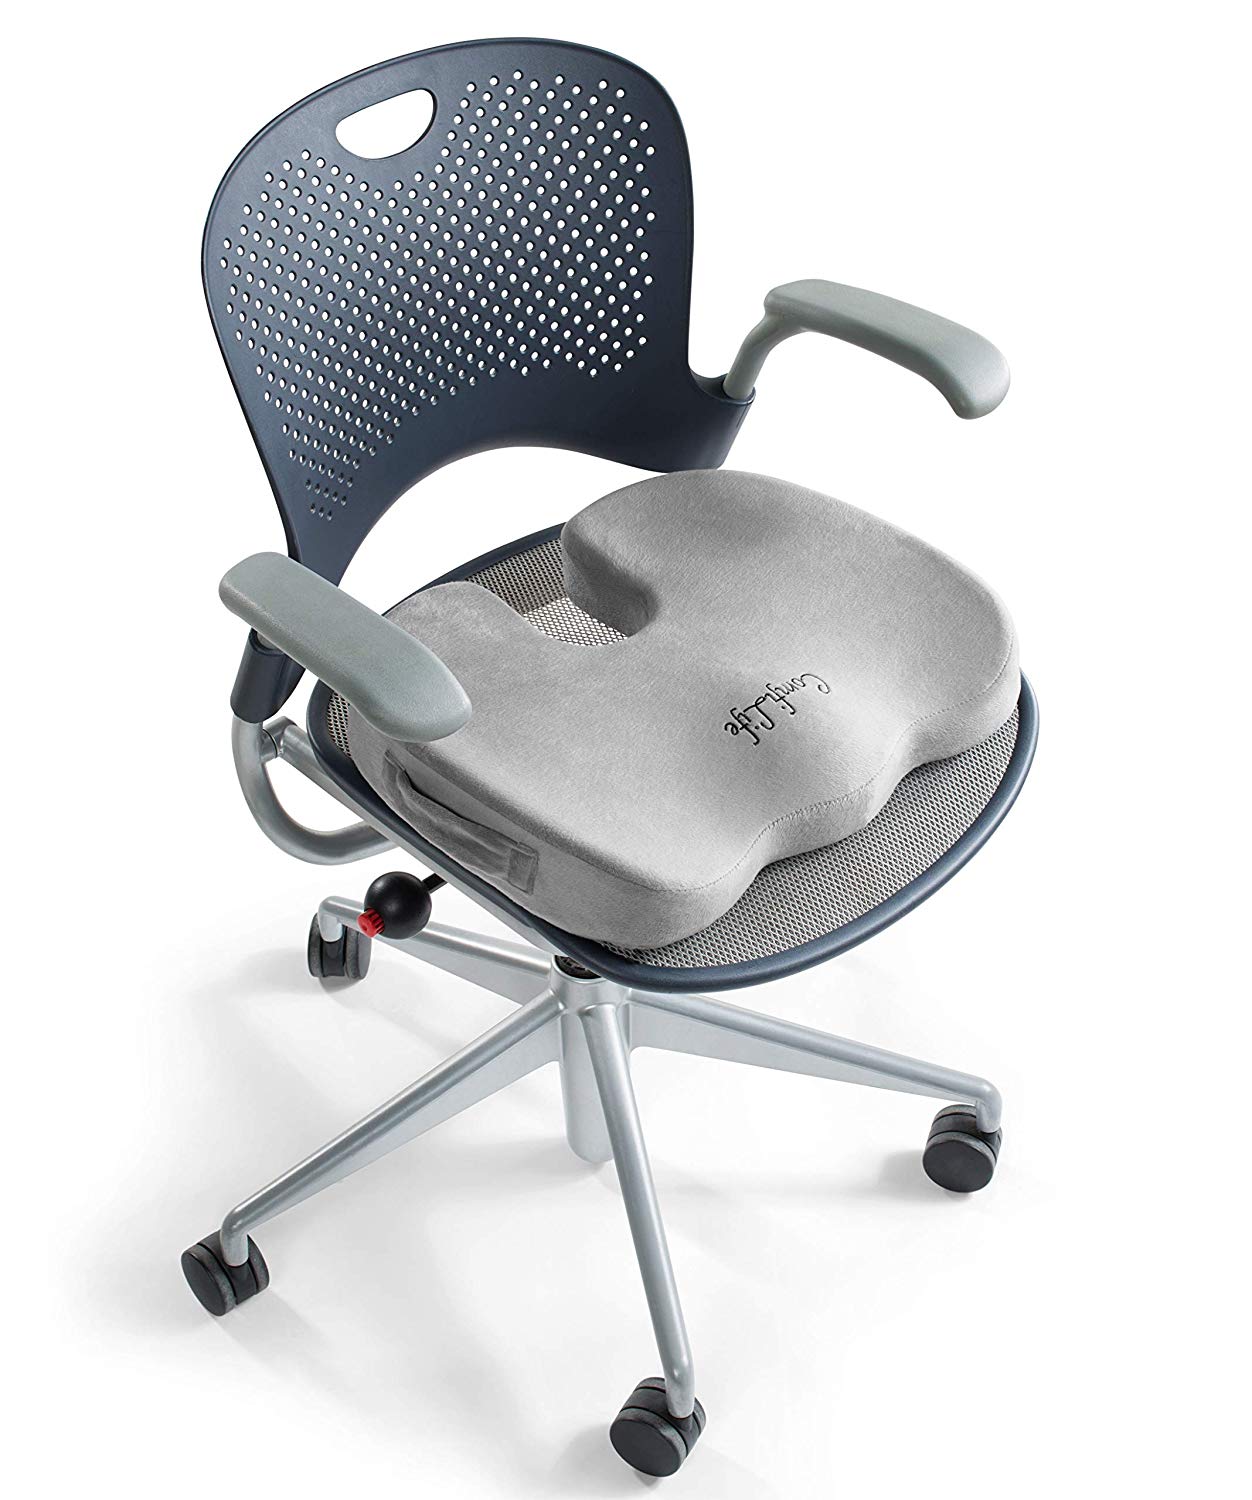 Best Office Chairs For Tailbone Pain Ratedrecommendations.com  